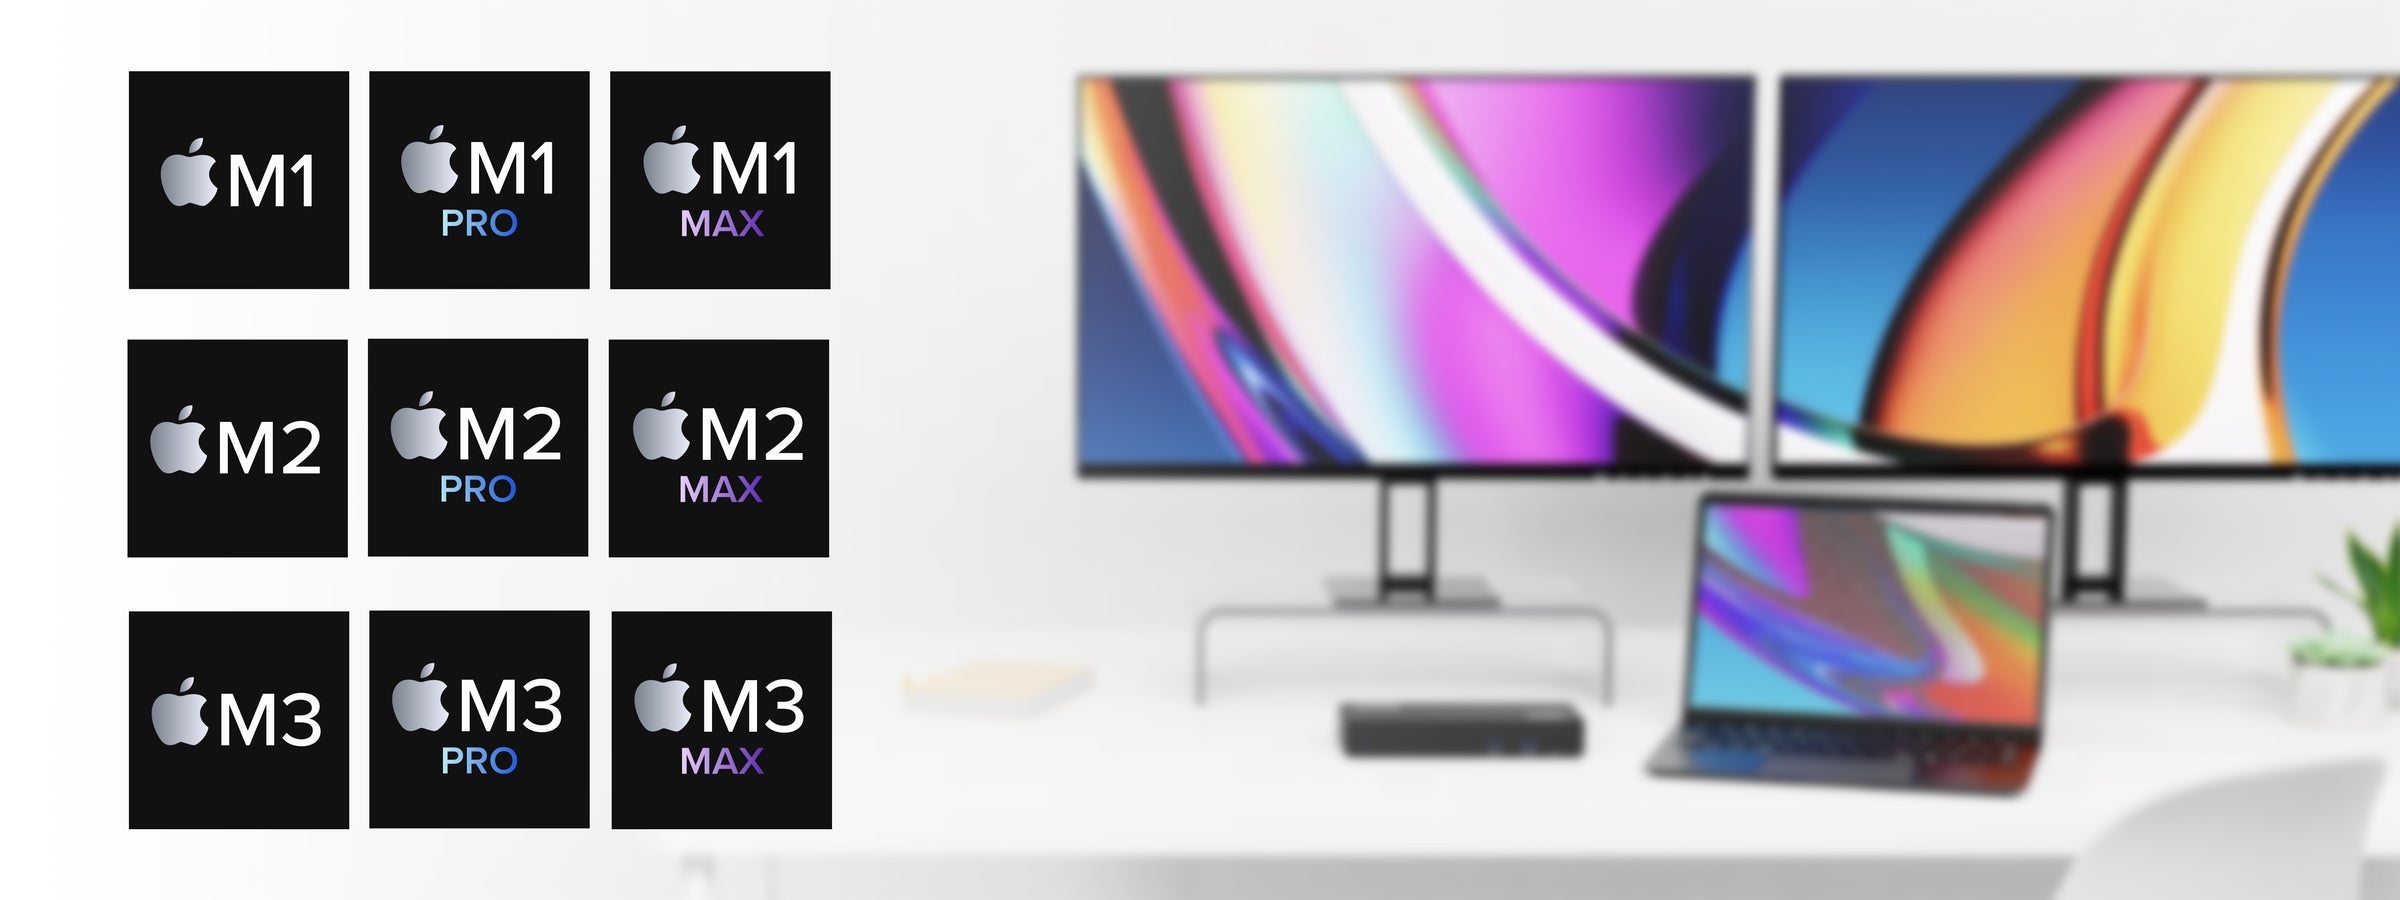 Two displays with any of the M1, M2, M3 Macs along with their Pro and Max variants